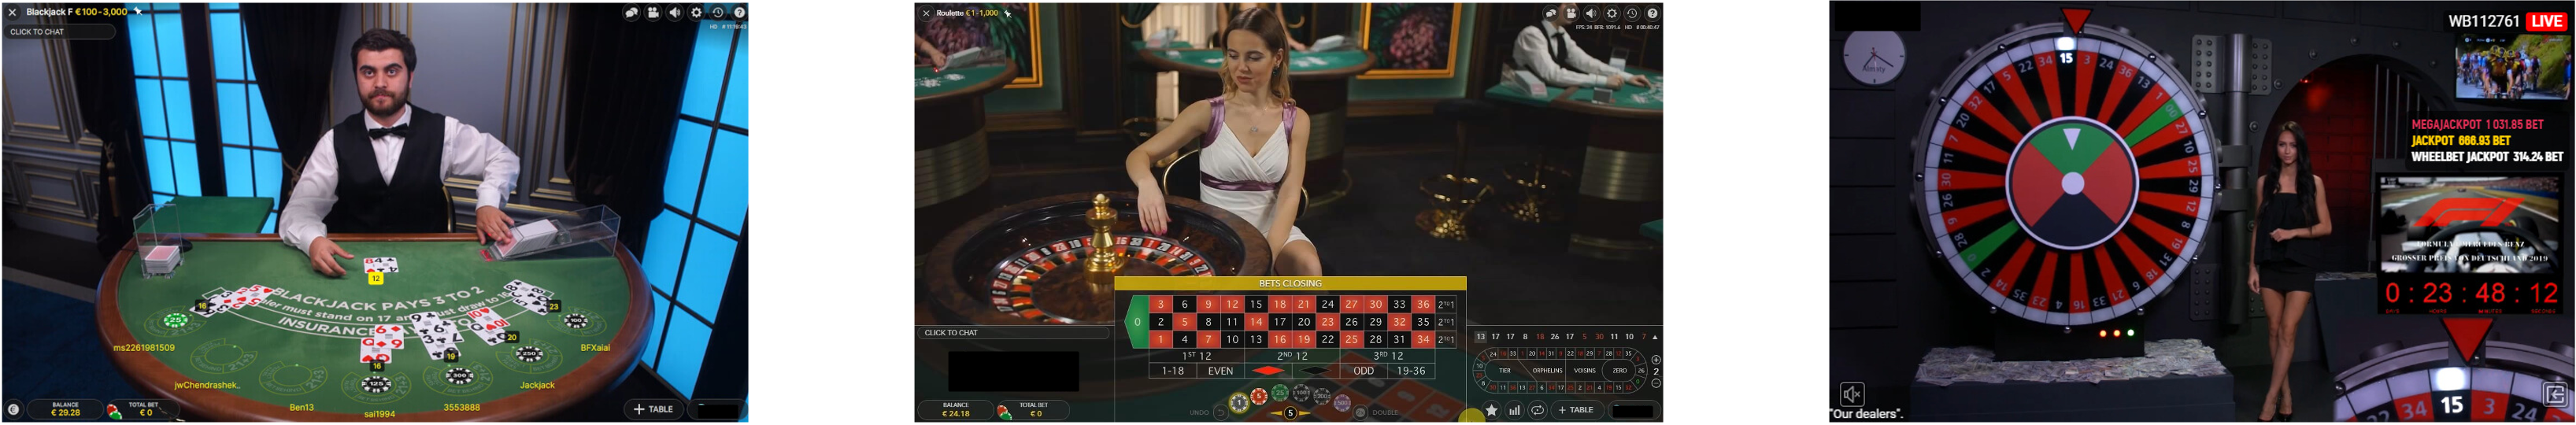 Live dealer casino games have varying latency needs casino blog visual